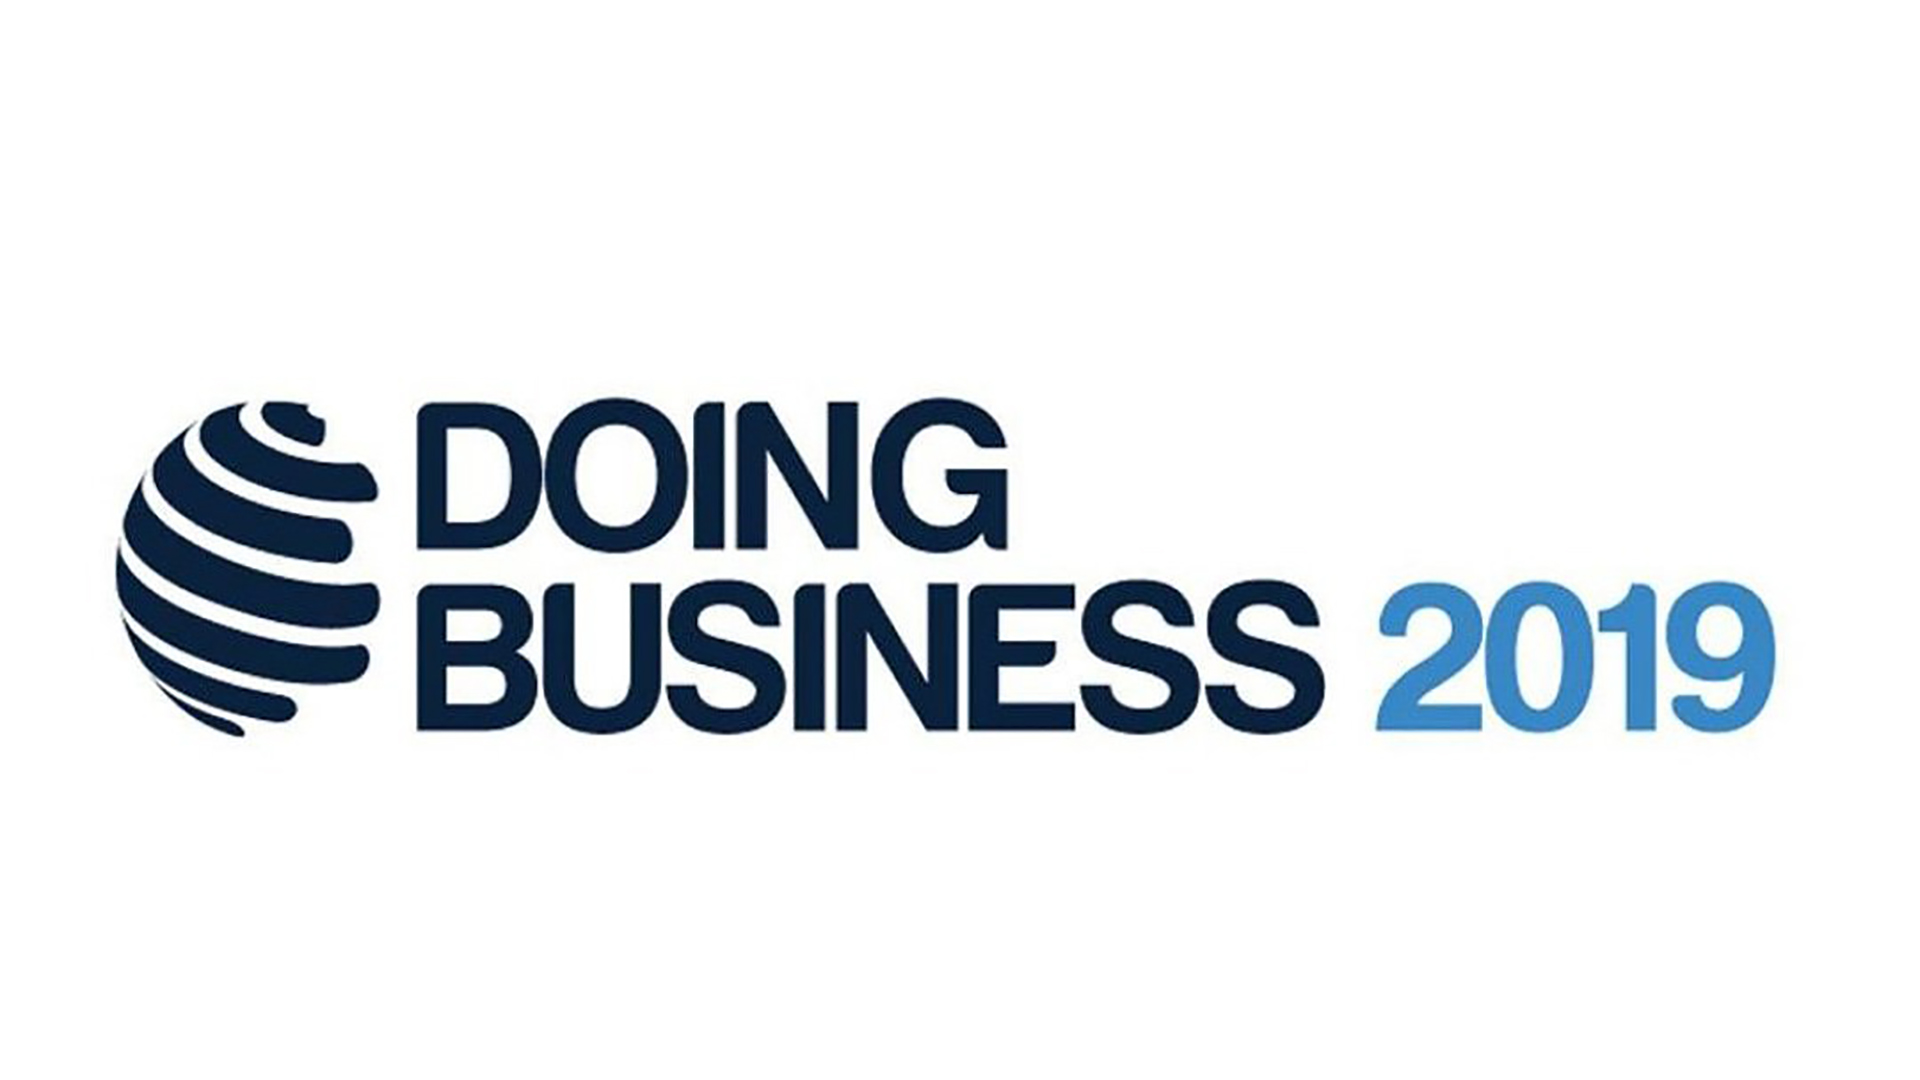 Kazakhstan takes 25th place in Doing Business ranking